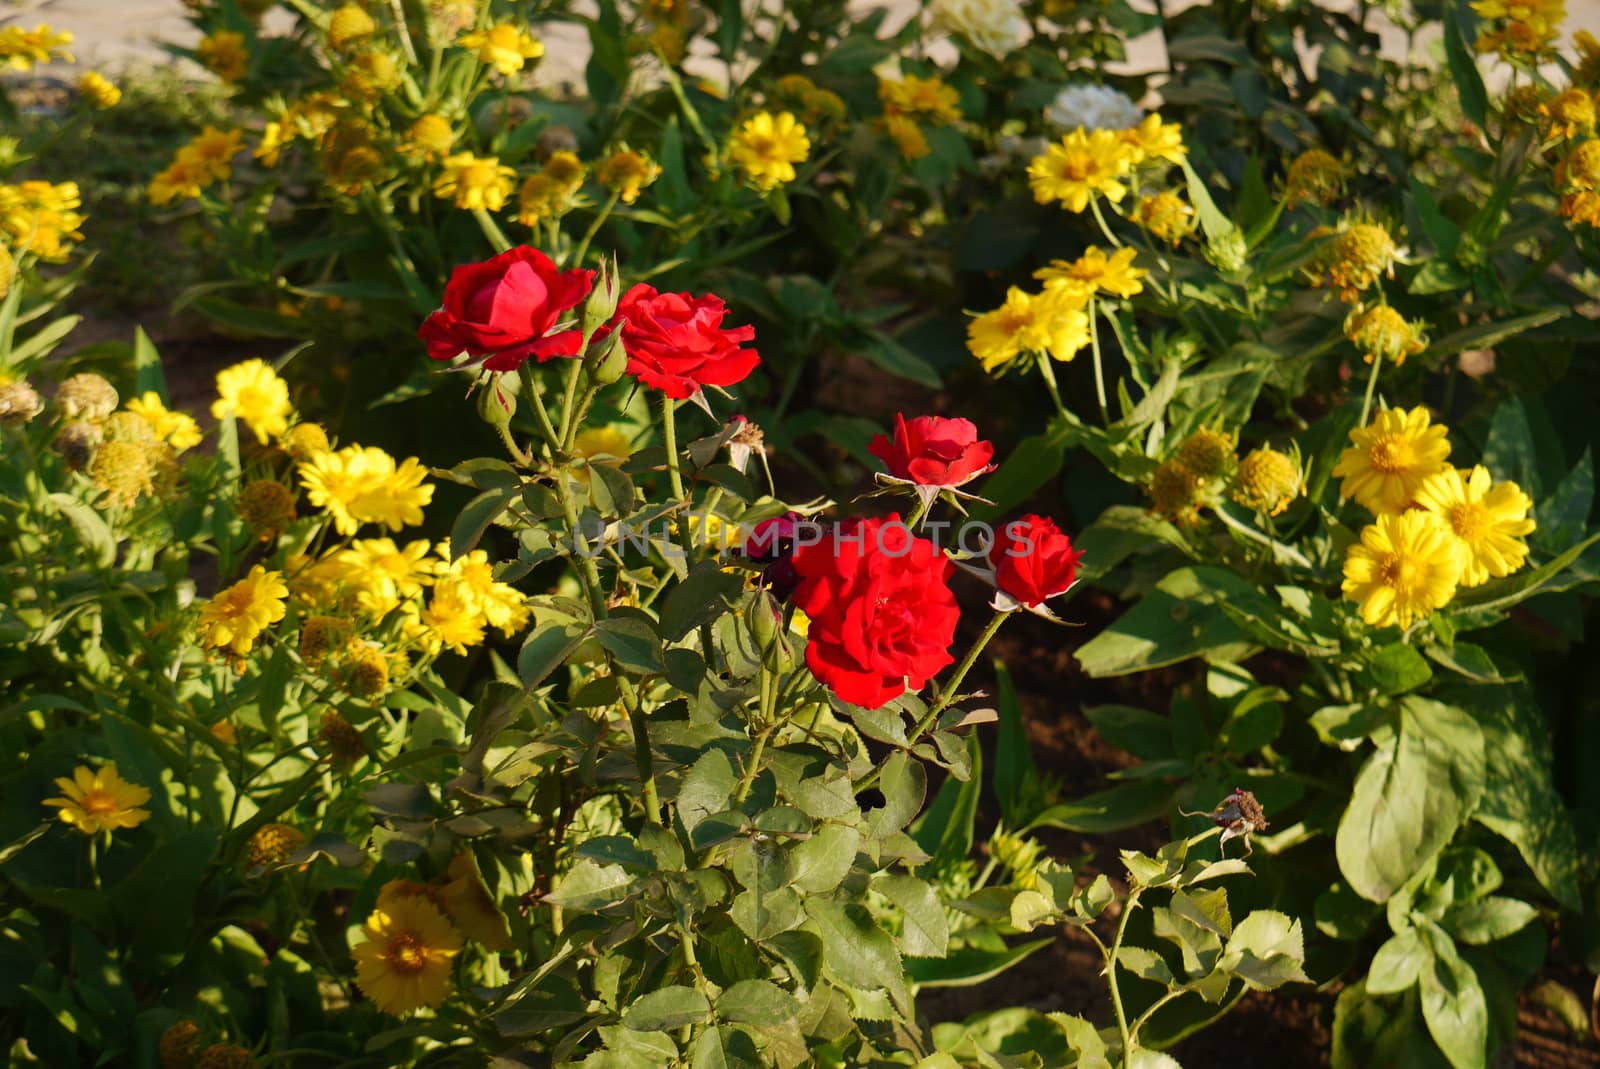 A bush of red roses surrounded by dahlia flowers, which are called gay guys. Like girls between guys by Adamchuk